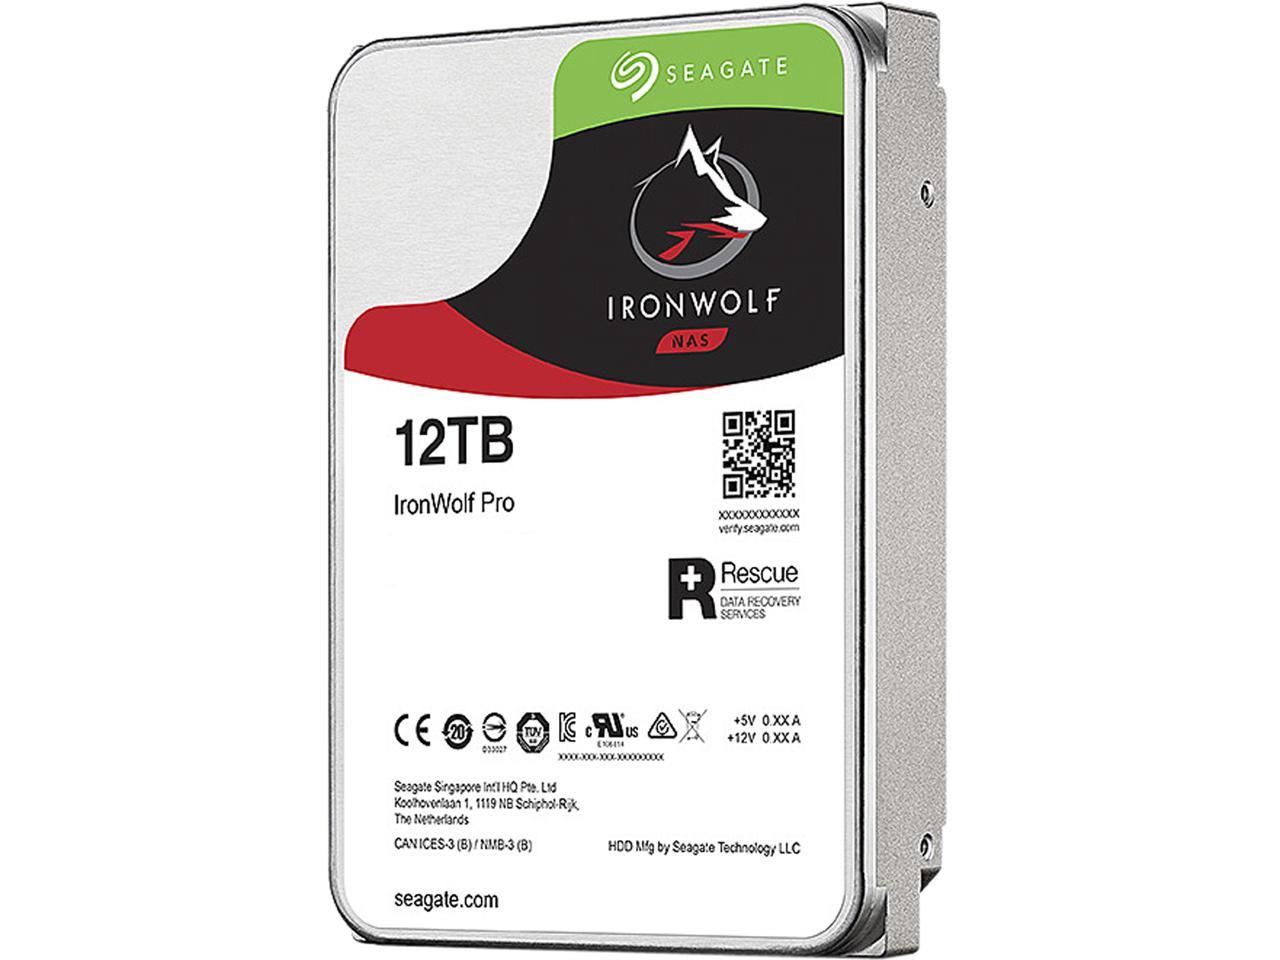 Seagate IronWolf Pro, 20 TB, Enterprise NAS Internal HDD –CMR 3.5 Inch,  SATA 6 Gb/s, 7,200 RPM, 256 MB Cache for RAID Network Attached Storage